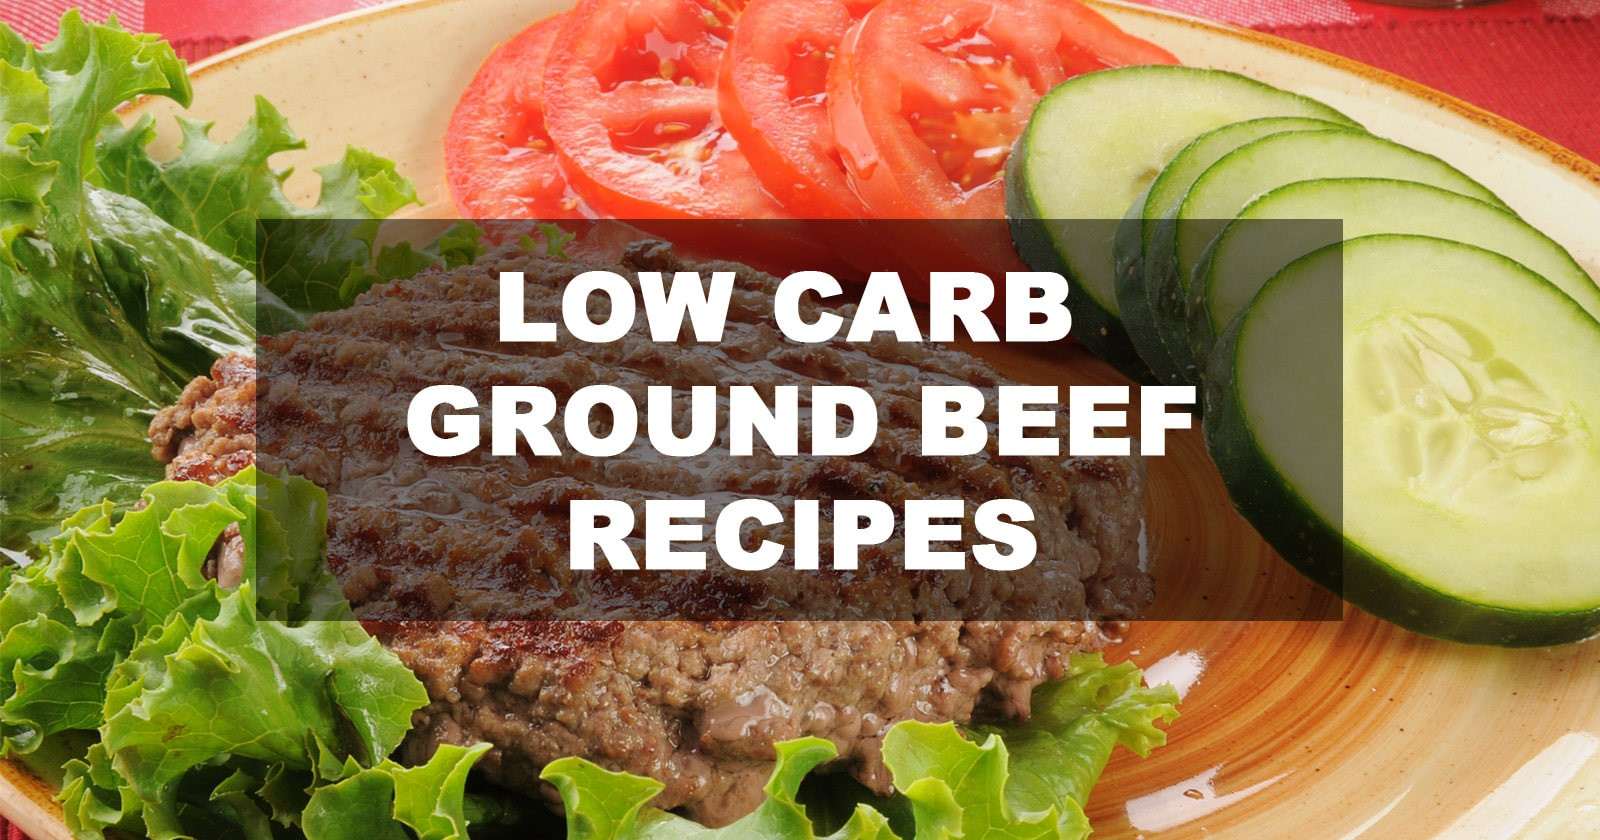 Low Calorie Ground Beef Recipes
 Best Low Carb Ground Beef Recipes October 2018